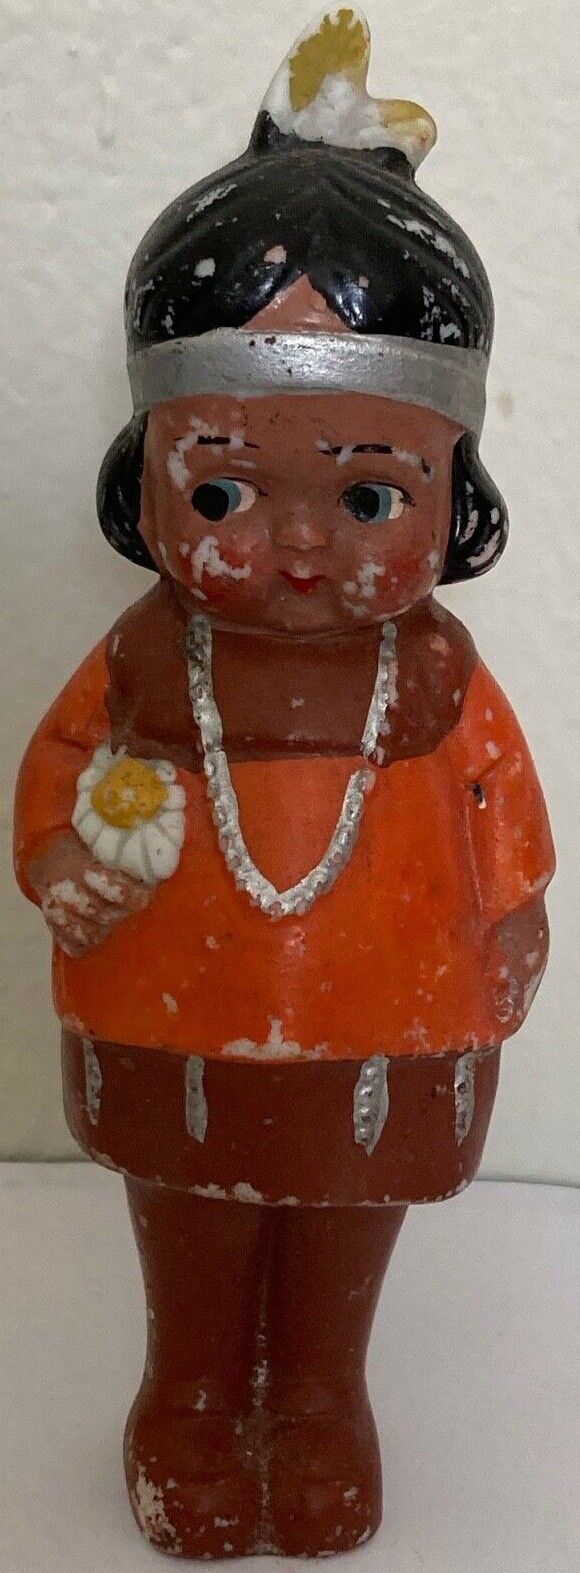 RARE Vintage Bisque Porcelain Shy Native American Indian Girl 6 inches tall A270